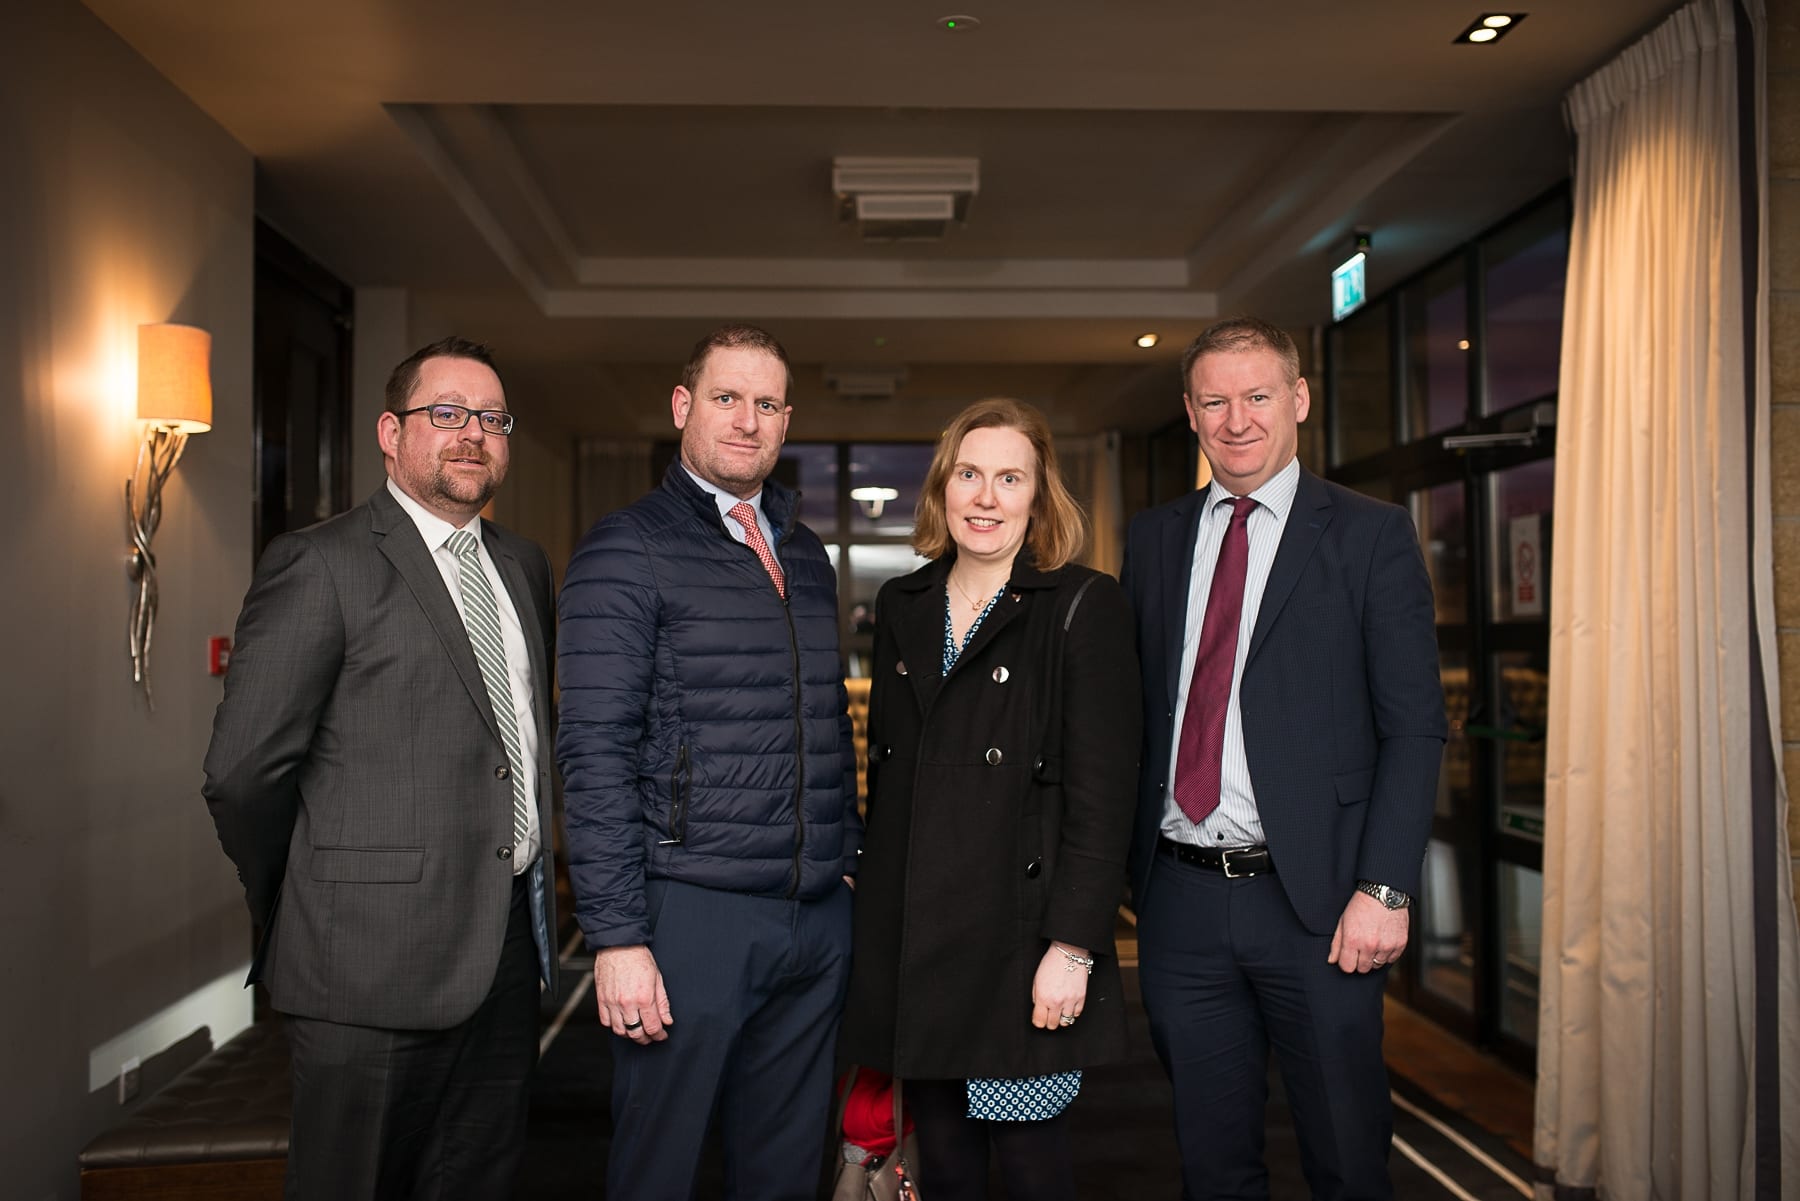 Economic Breakfast Briefing; European and Local Economic Outlook In association with the Limerick Post which took place in the Castletroy Park Hotel on Monday 11th Feb 2019:  From left to right:Stephen O’Connor - Limerick Strand Hotel, Graham Wright - PWC, Ann Marie Nash - Limerick Strand Hotel, Damien Garrihy - AIB. 
  Image by Morning Star Photography